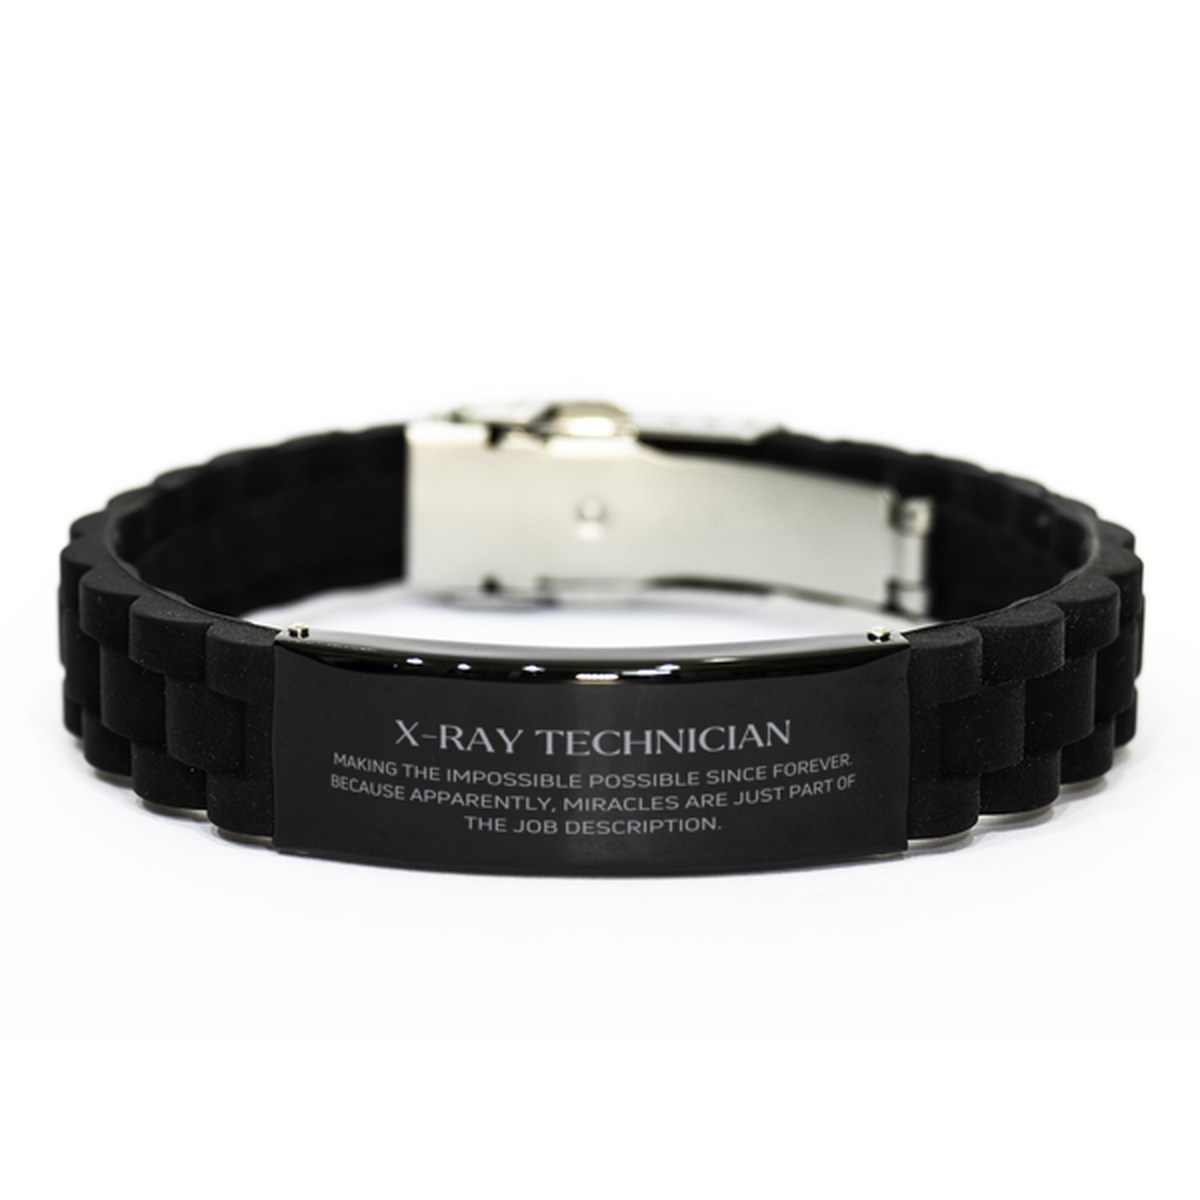 Funny X-Ray Technician Gifts, Miracles are just part of the job description, Inspirational Birthday Black Glidelock Clasp Bracelet For X-Ray Technician, Men, Women, Coworkers, Friends, Boss